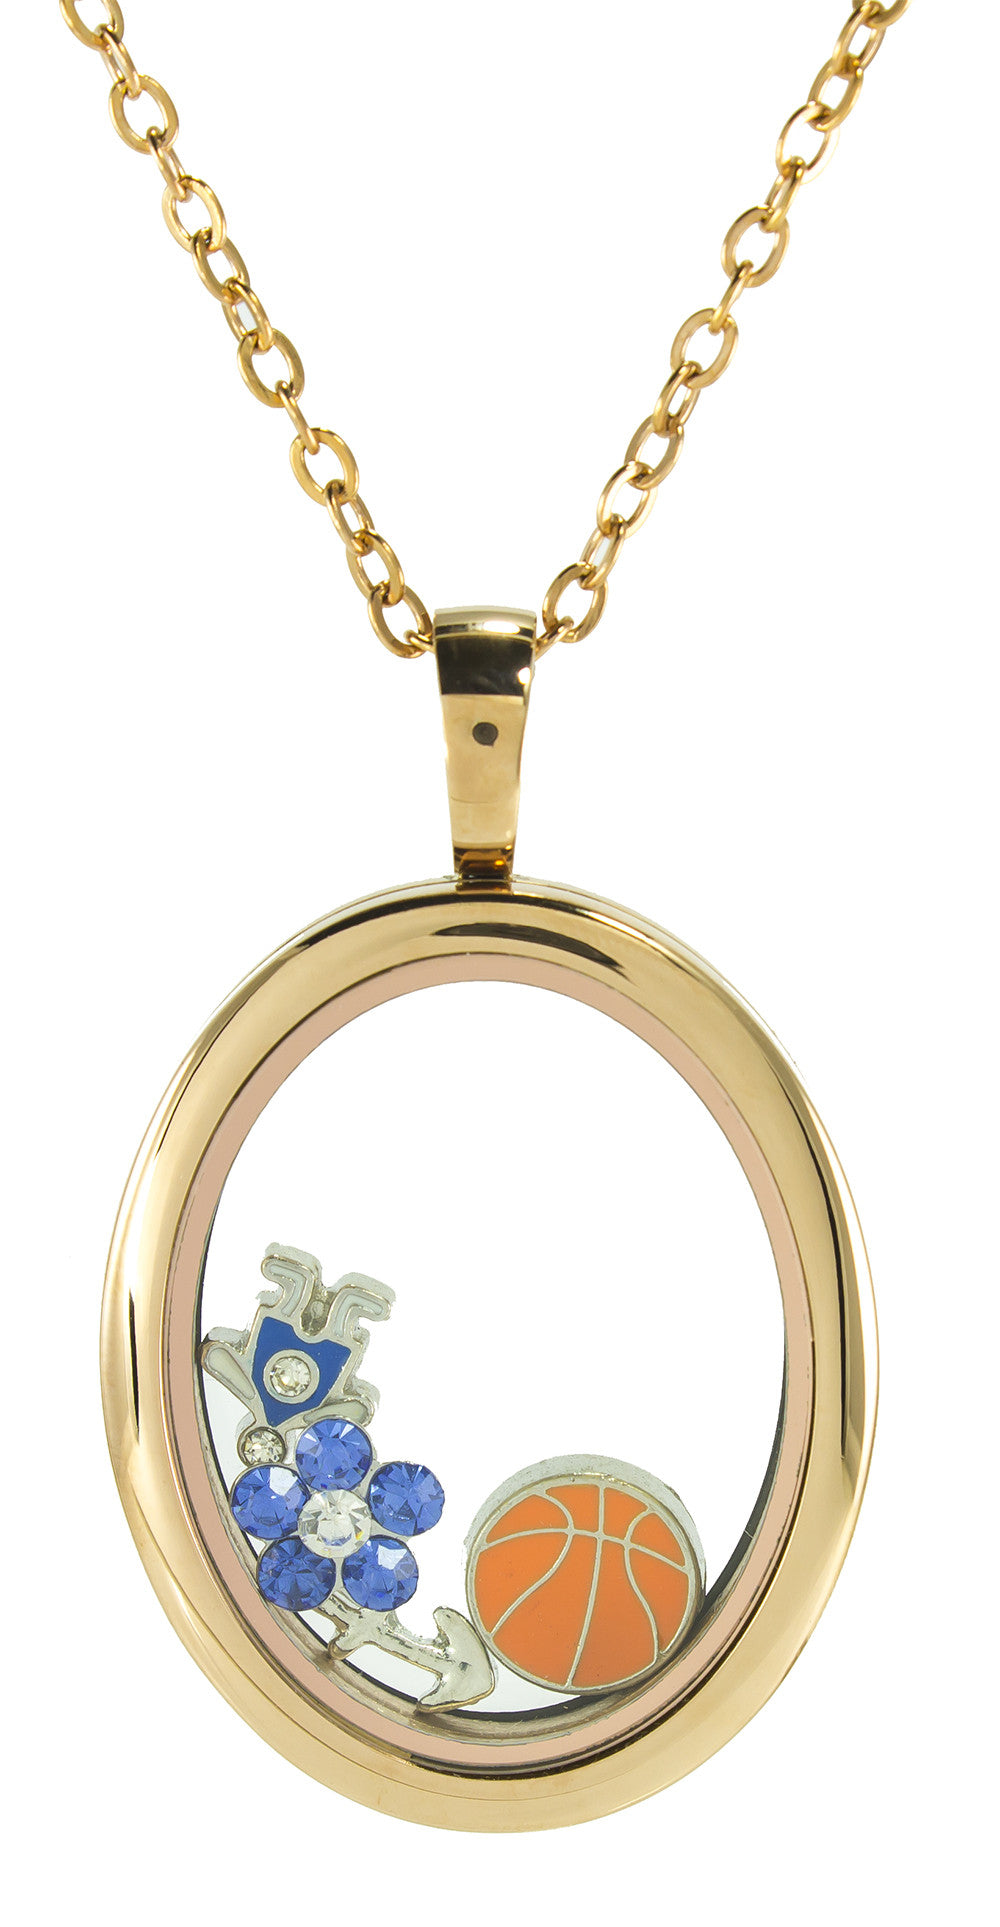 Floating Locket Oval with Choice of 6 Charms